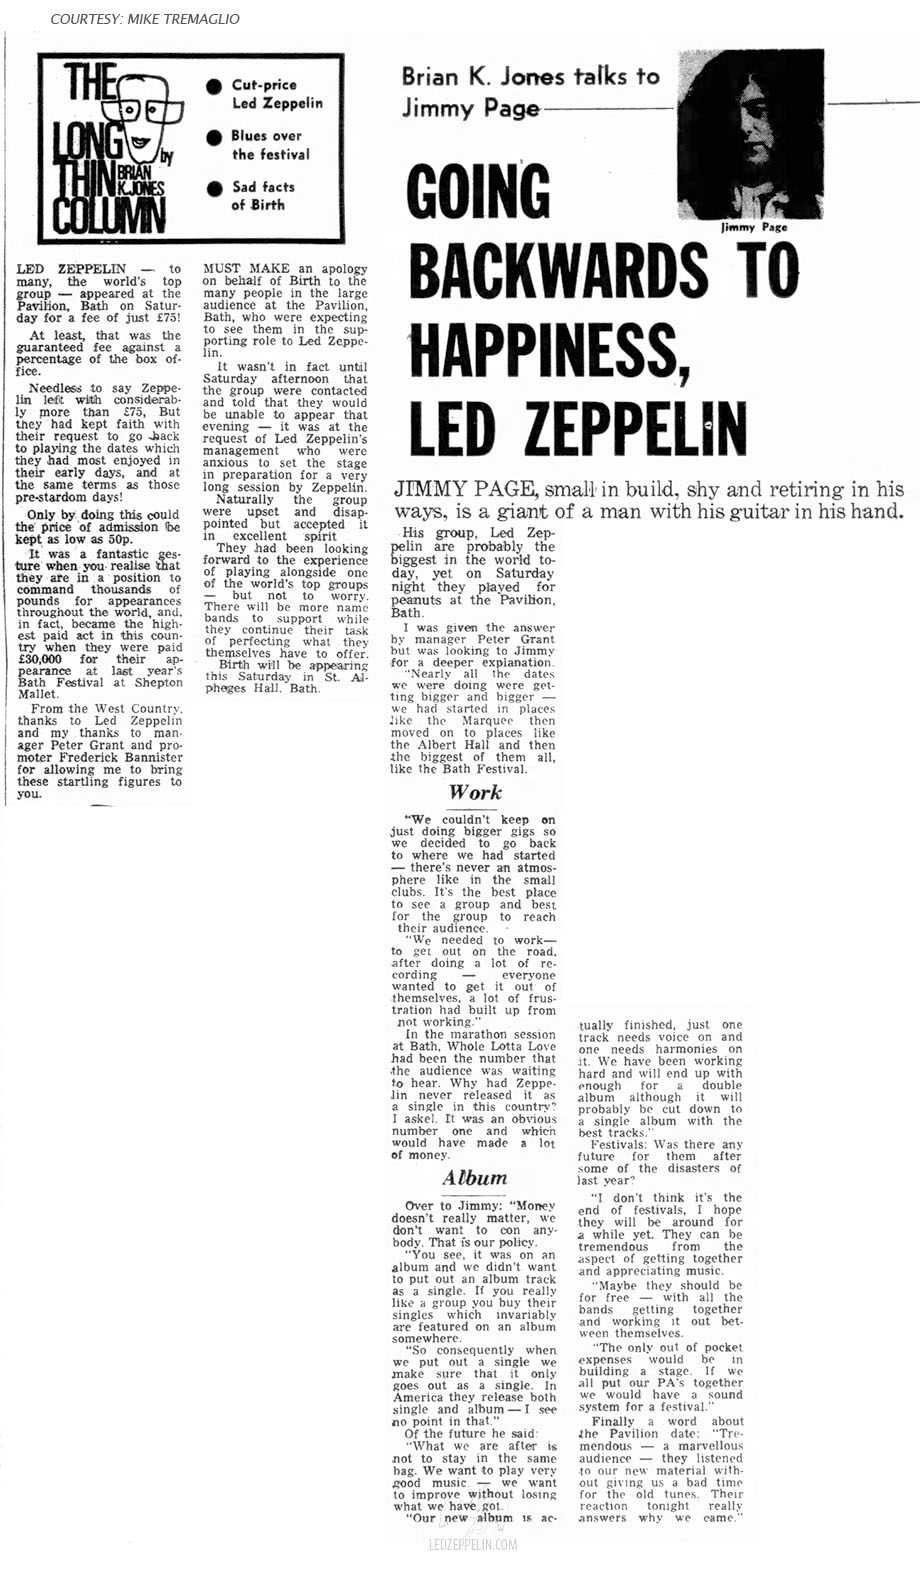 Manchester 3-19-71 / Jimmy Page Interview / 'Going Backwards to Happiness'